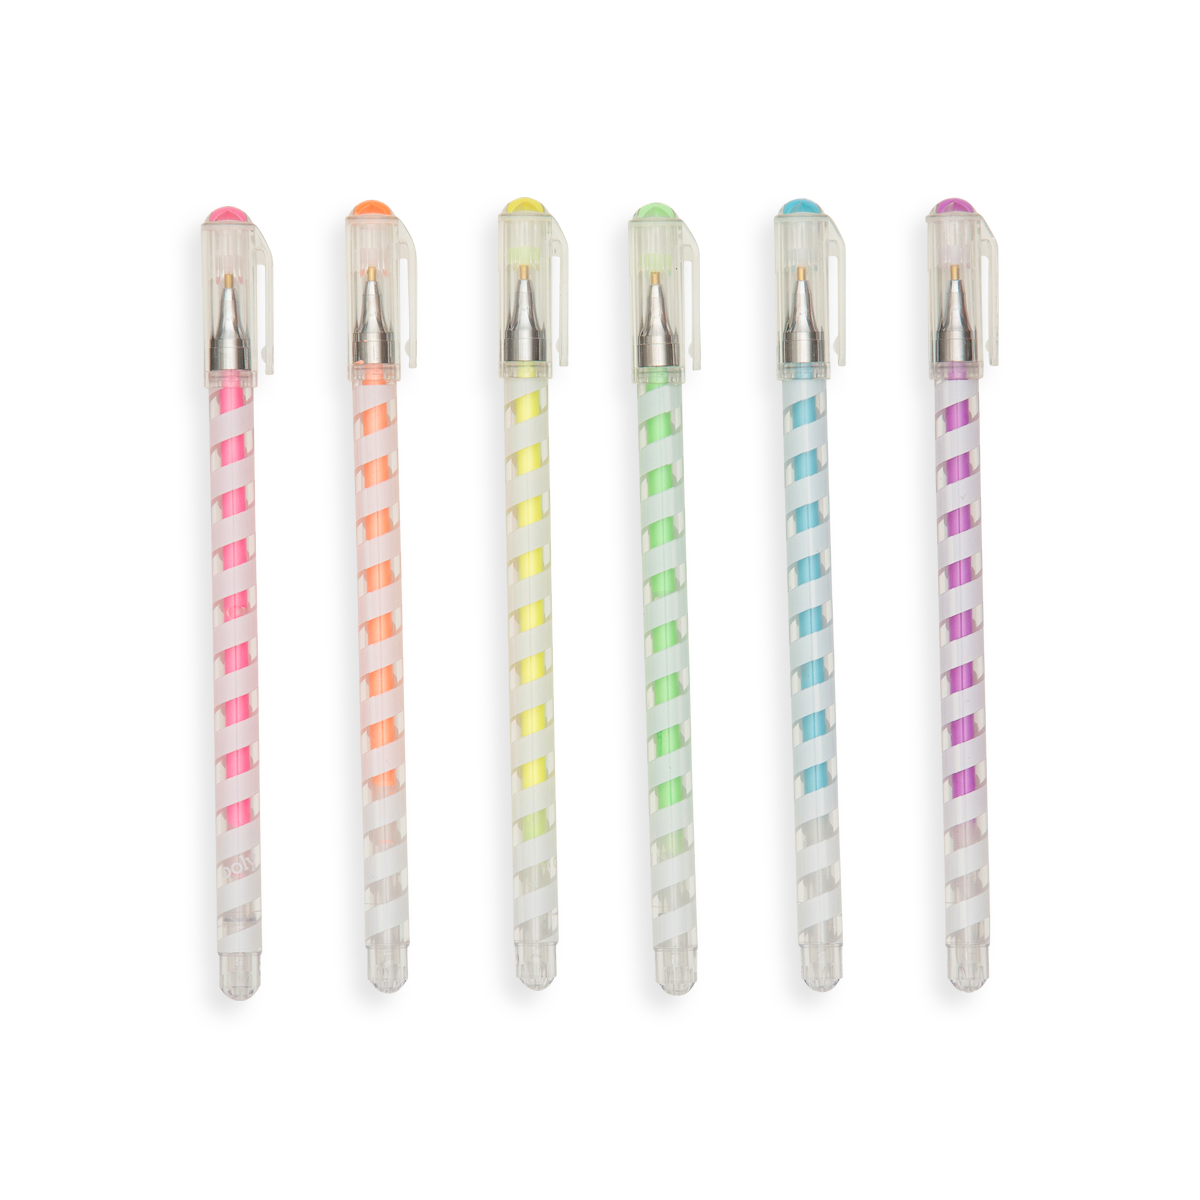 Ooly - Totally Taffy Scented Gel Pens [Set of 6] - Amiko Boutique